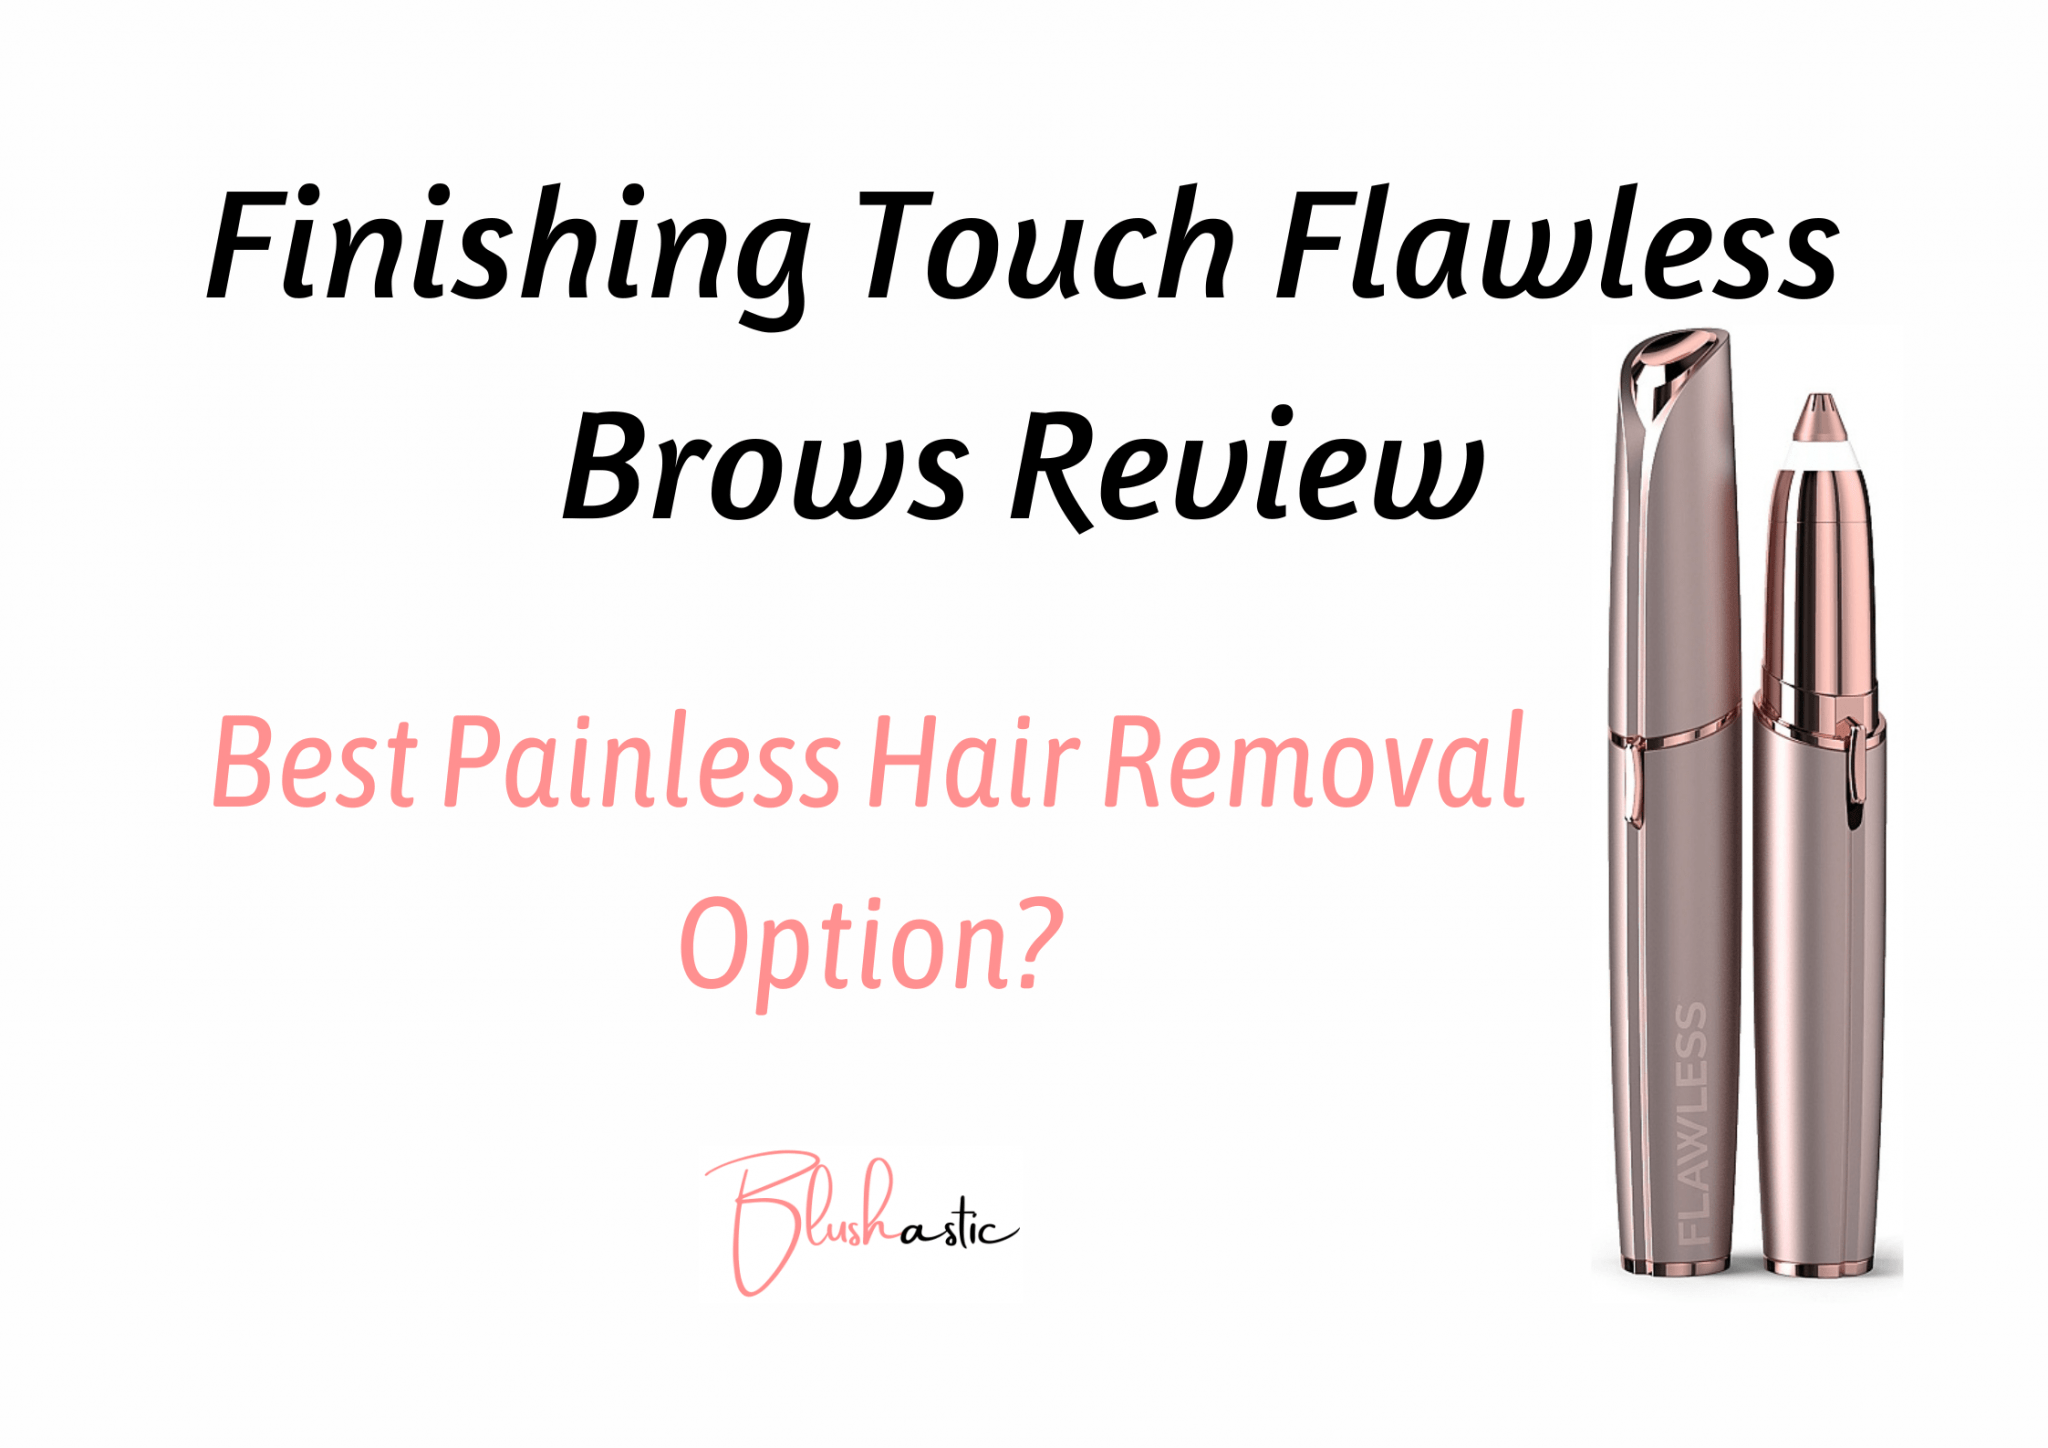 flawless brows reviews